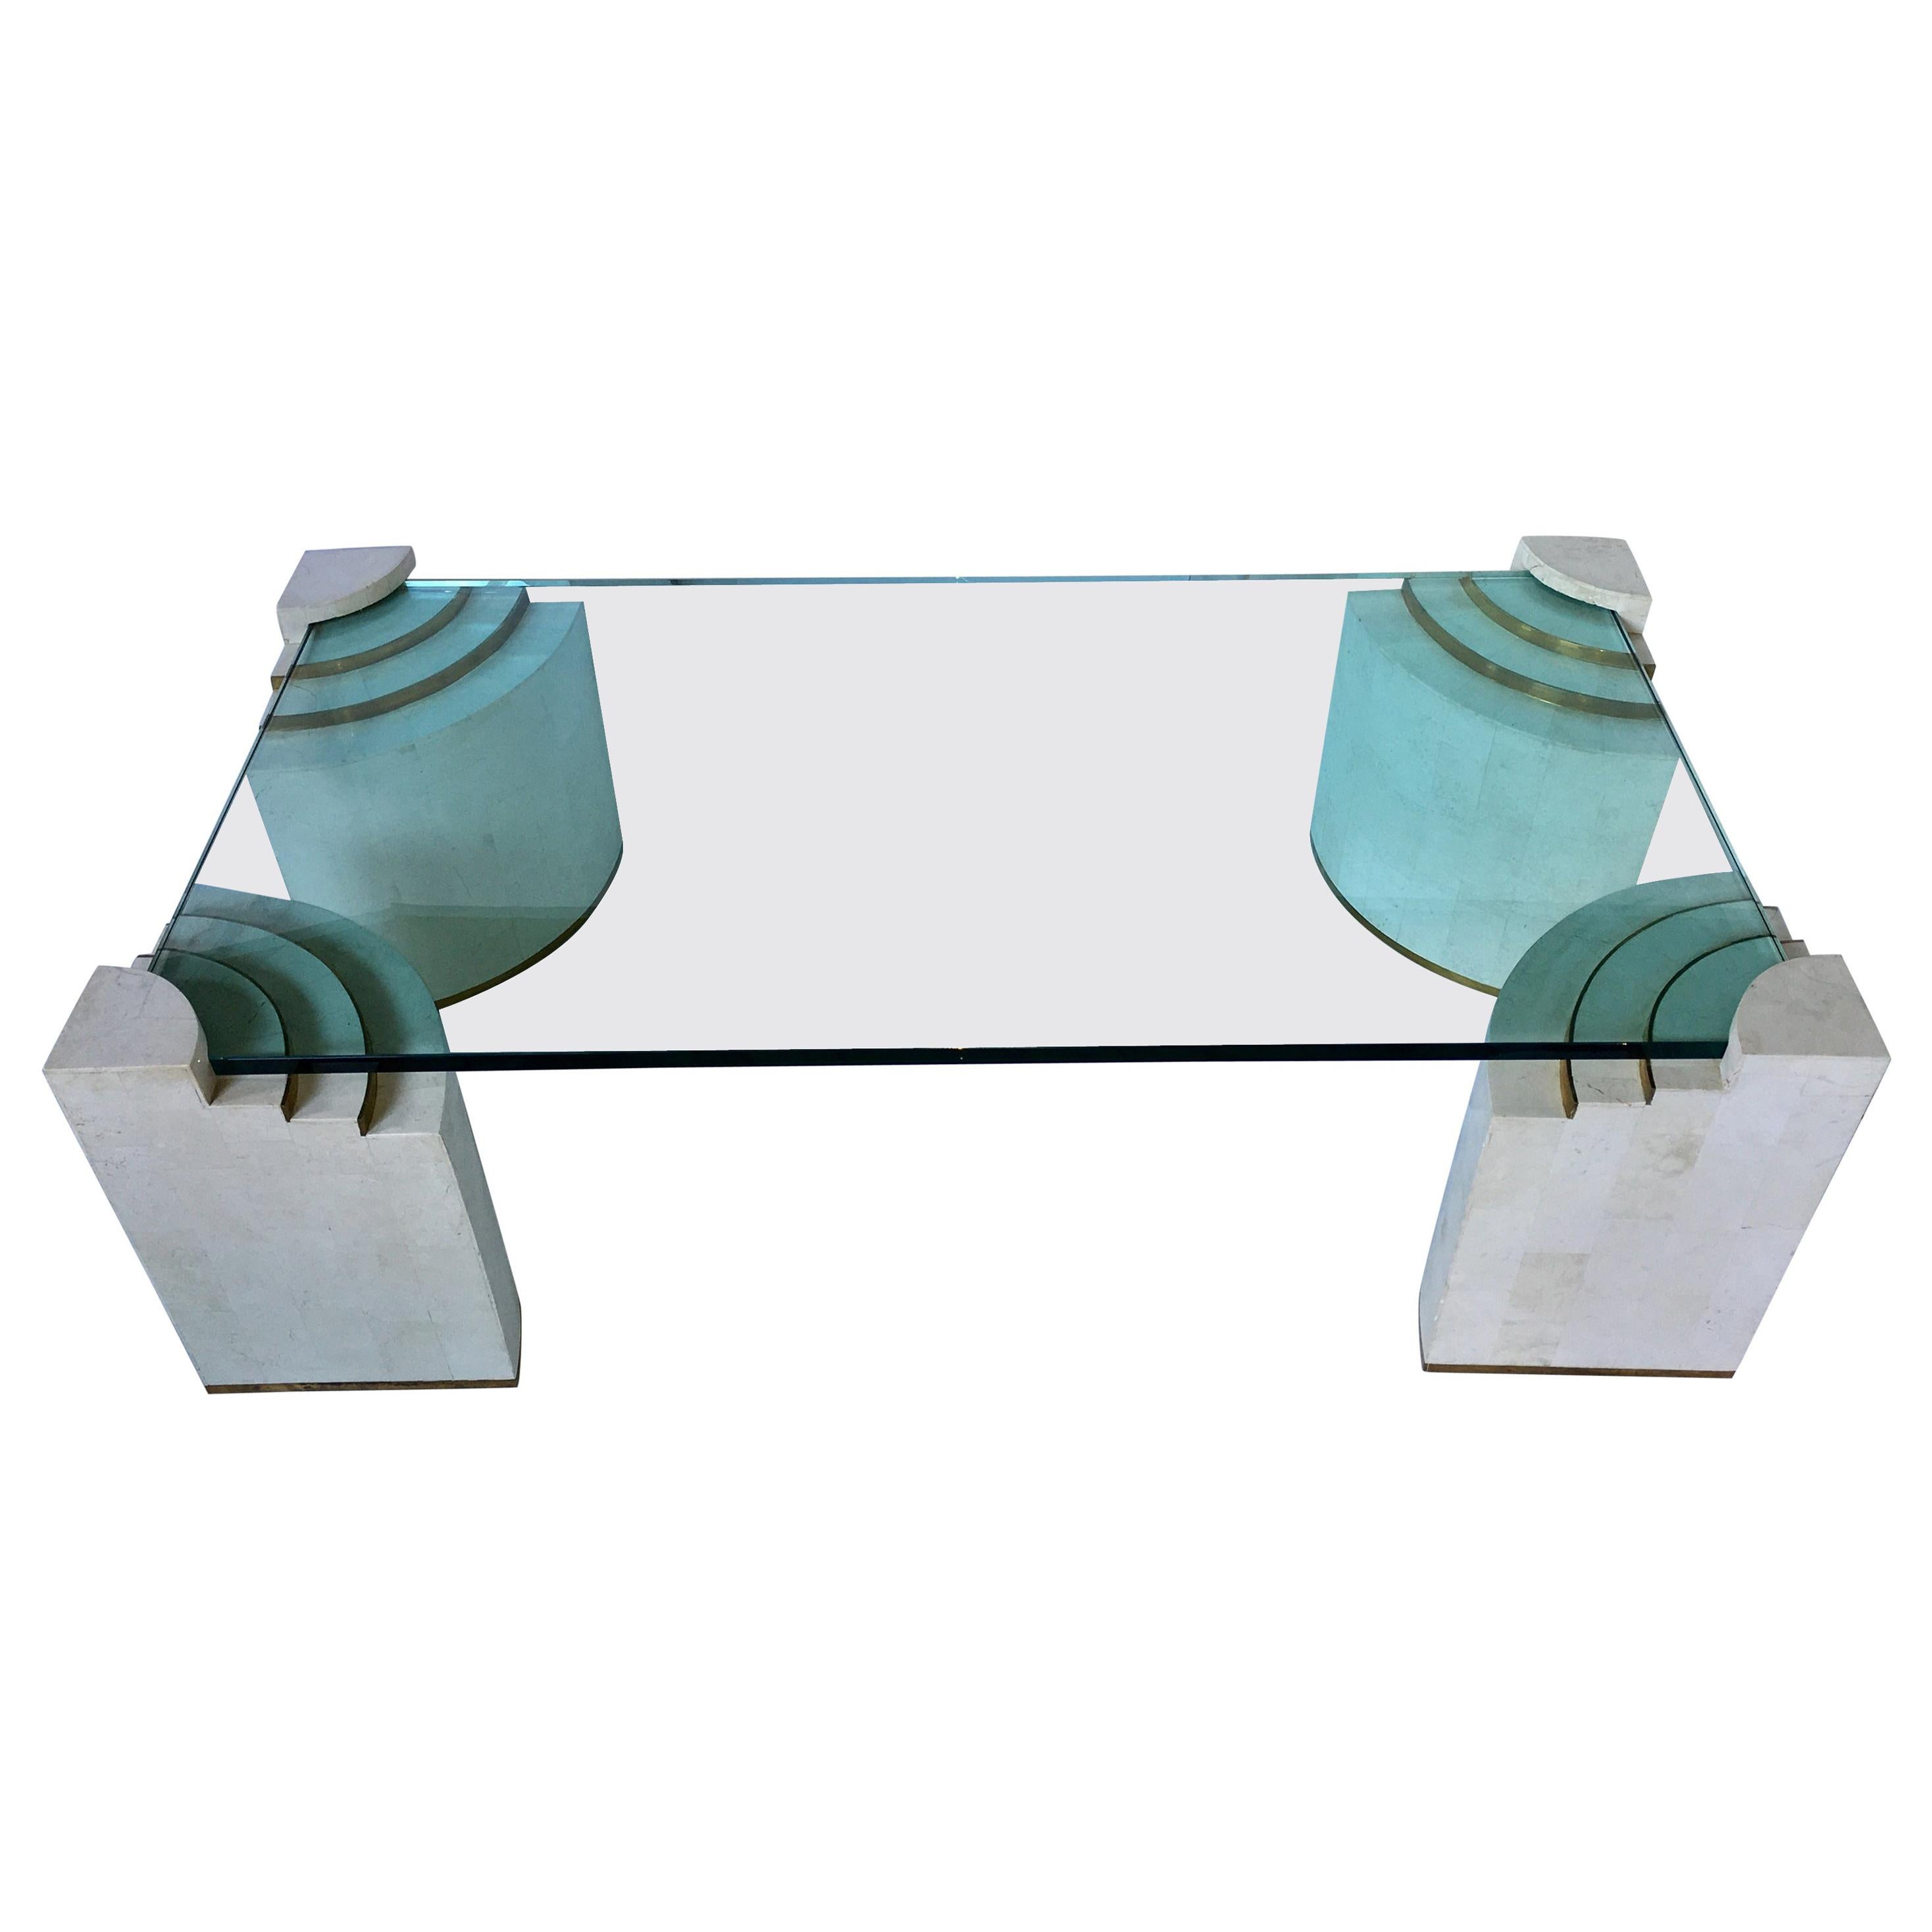 Sculptural Modern Tessellated Stone Glass and Brass Cocktail Table by Marcius